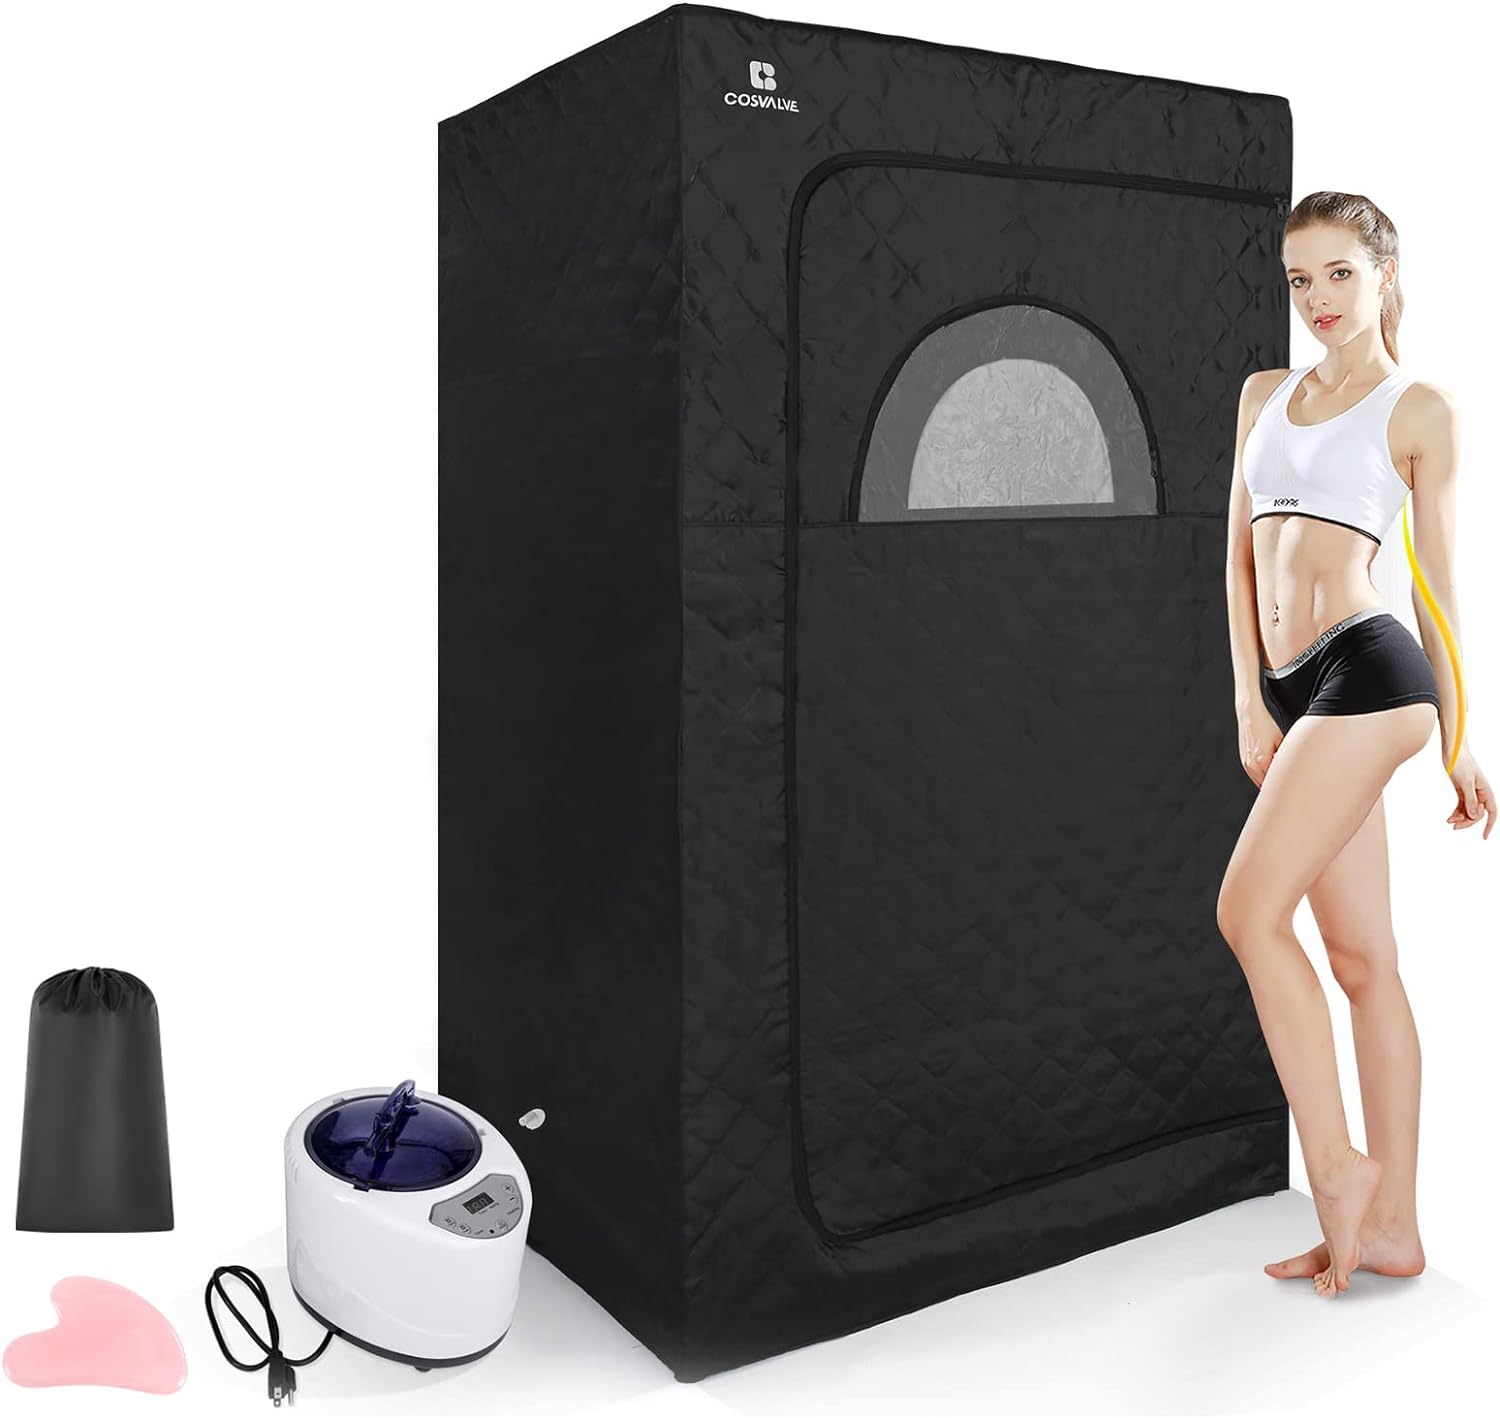 COSVALVE Portable Steam Sauna for Home, Full Size Personal Steam Room Sauna Box Kit with 2.6L 1000W Steam Generator, Remote Control, Indoor Sauna Tent for Home Spa Relaxation (39.3'' x 31.5''x 67'')